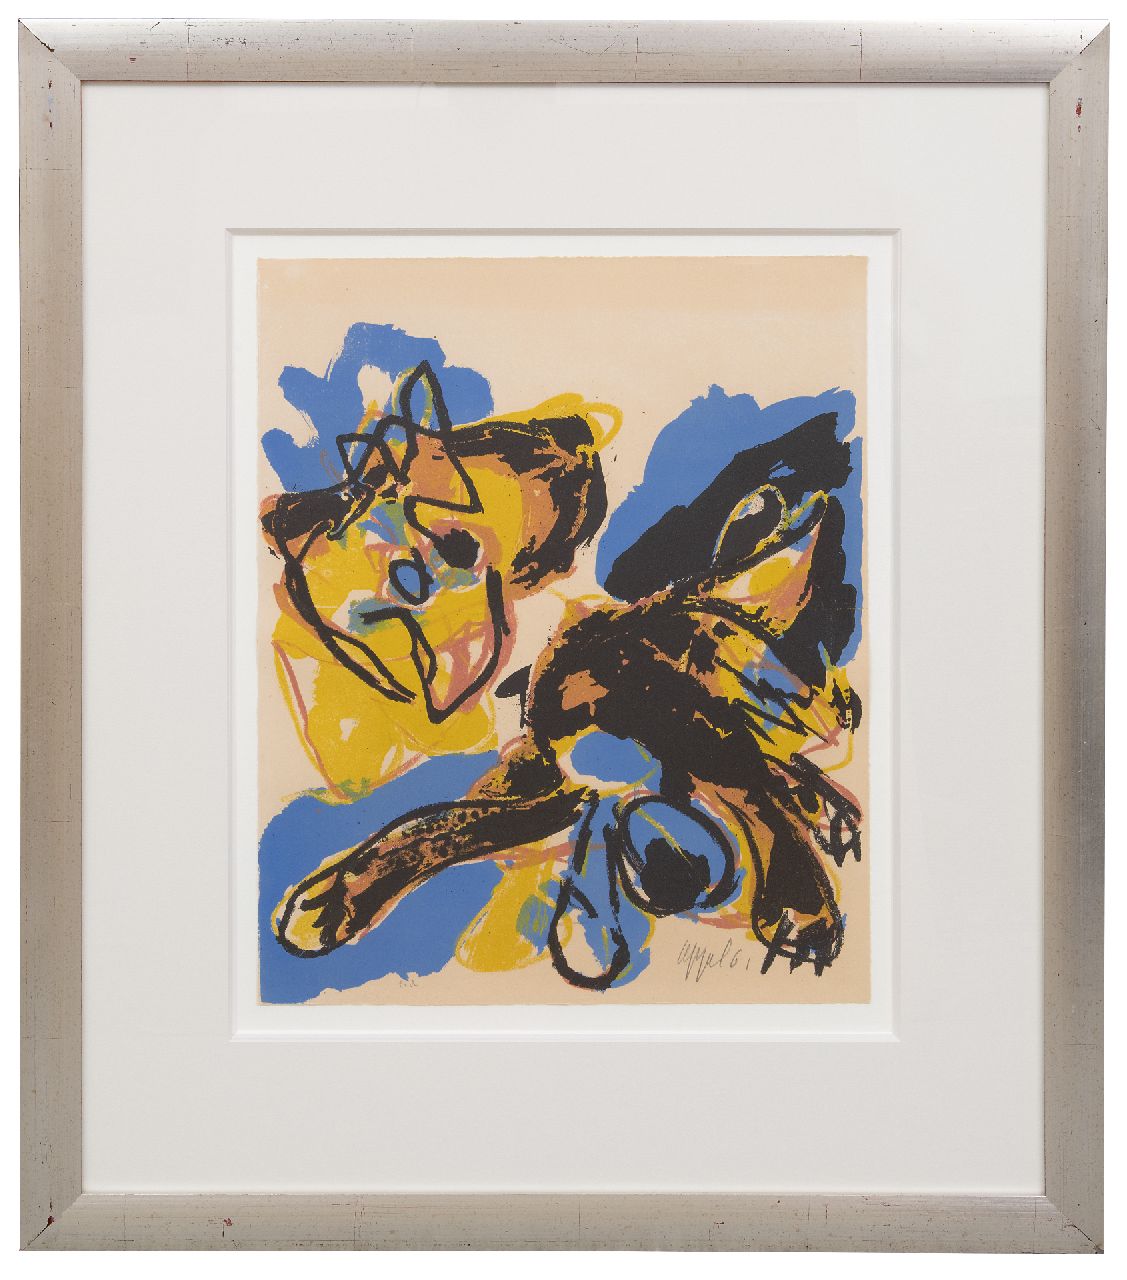 Appel C.K.  | Christiaan 'Karel' Appel | Prints and Multiples offered for sale | A beast drawn man, lithograph on paper 50.0 x 40.0 cm, signed l.r. (in pencil) and dated '61 (in pencil)